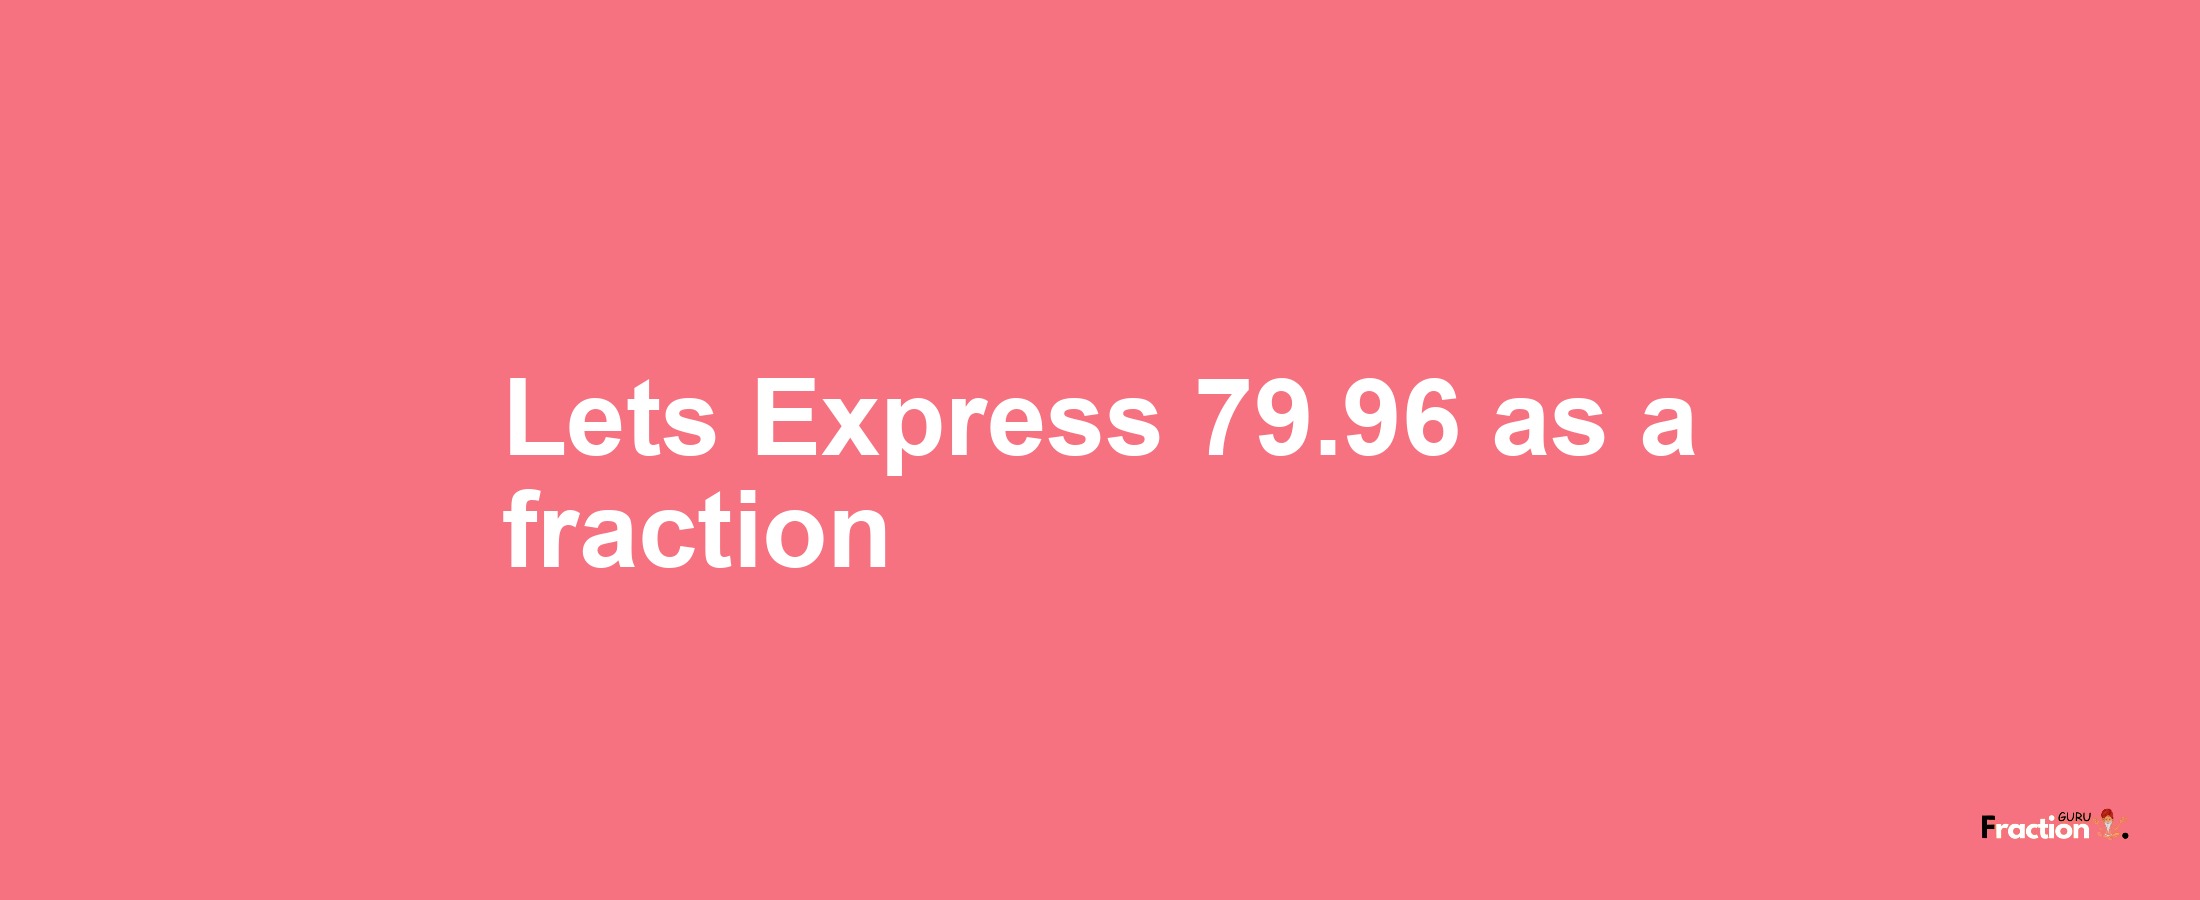 Lets Express 79.96 as afraction